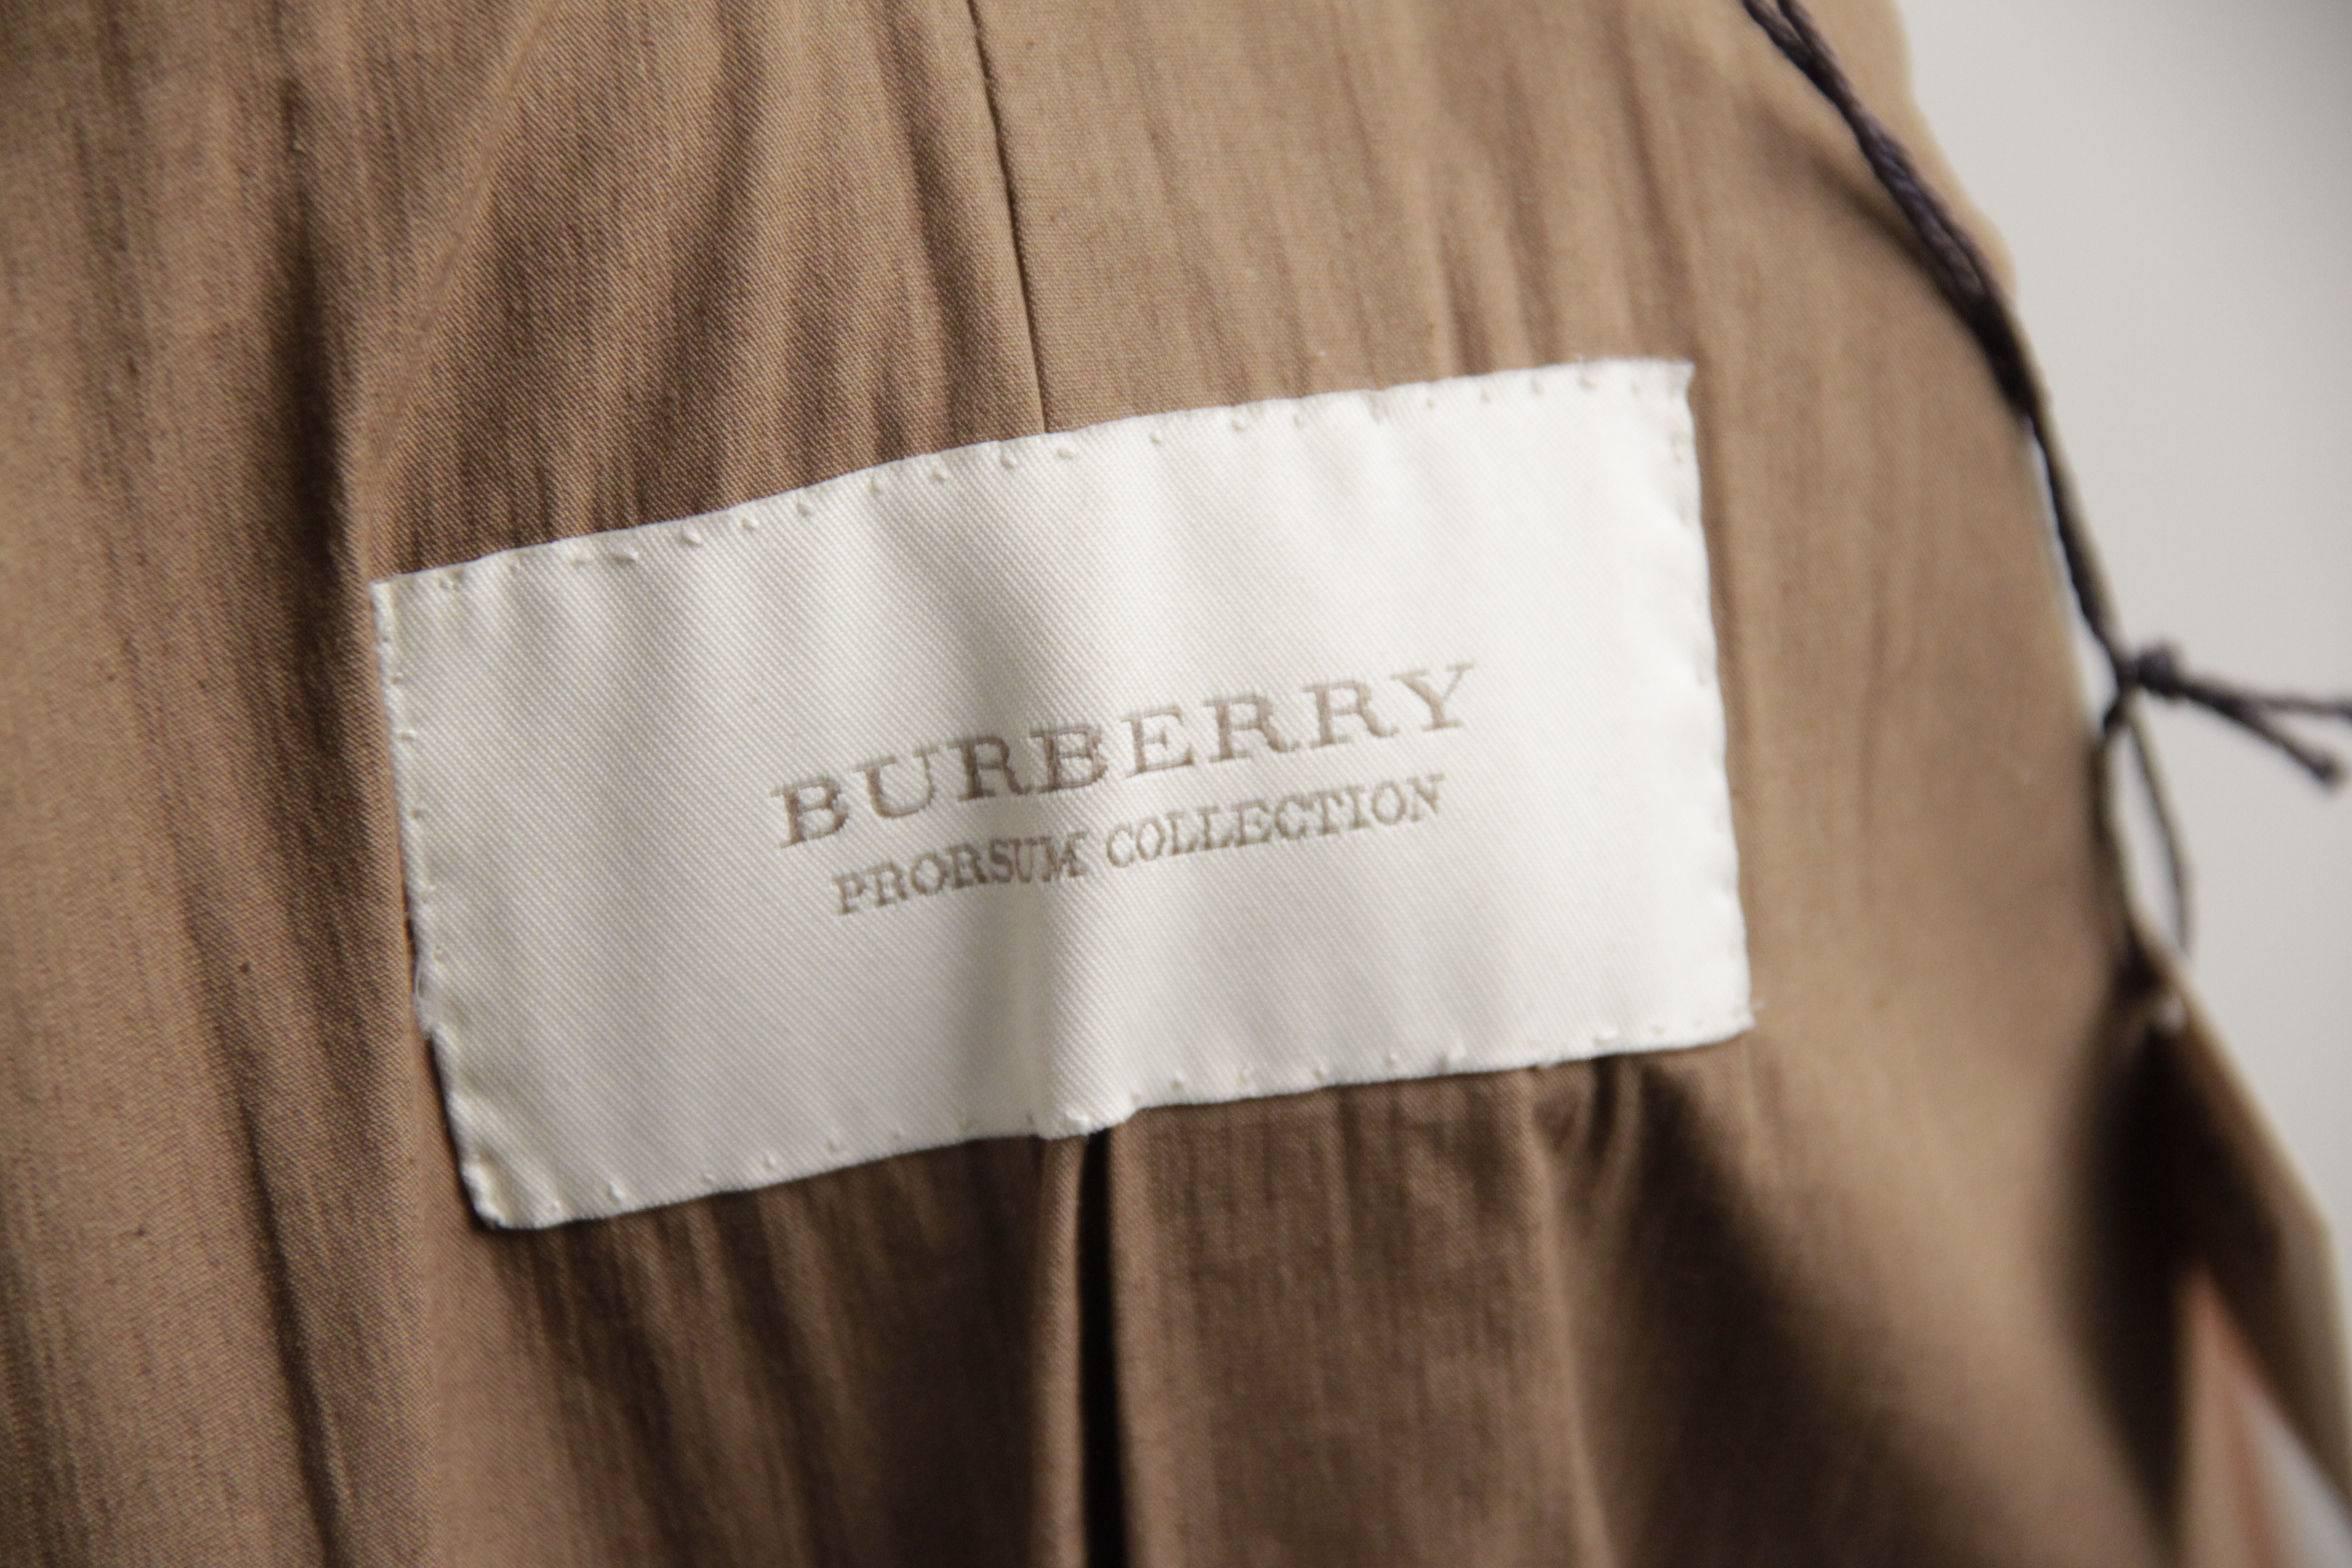 BURBERRY PRORSUM Tan Leather TRENCH COAT Double Breasted w/ BELT Size 44 2